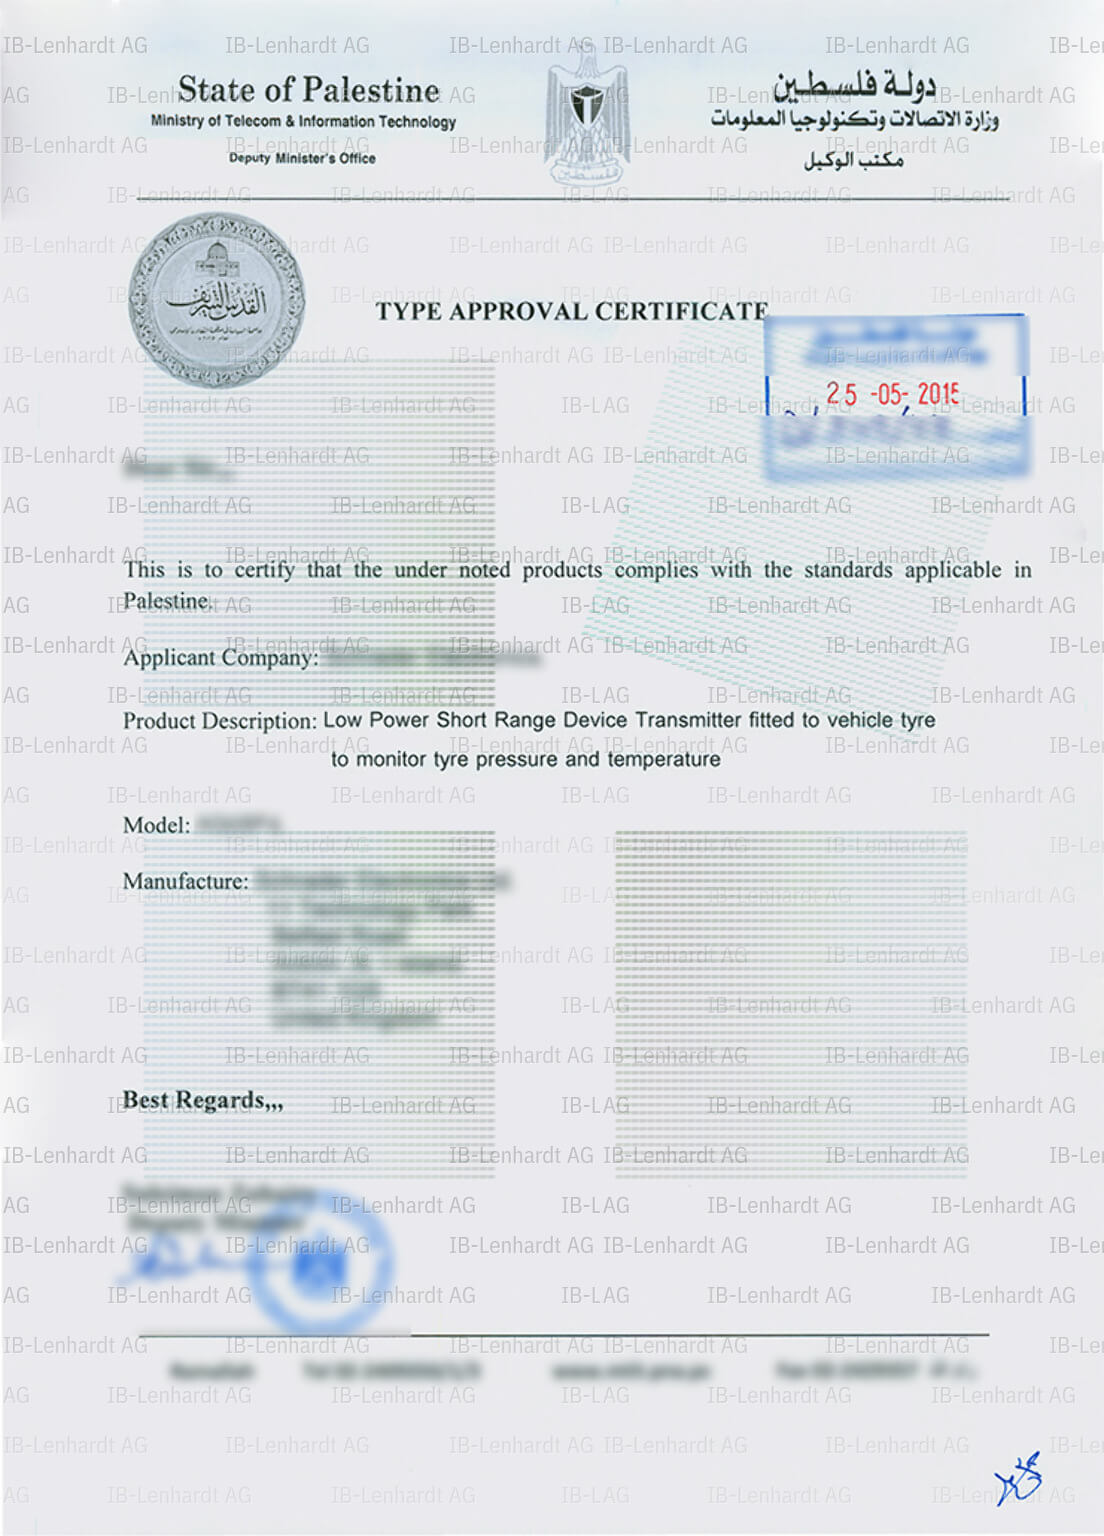 Example Radio Type Approval Certificate for Palestine (West Bank)